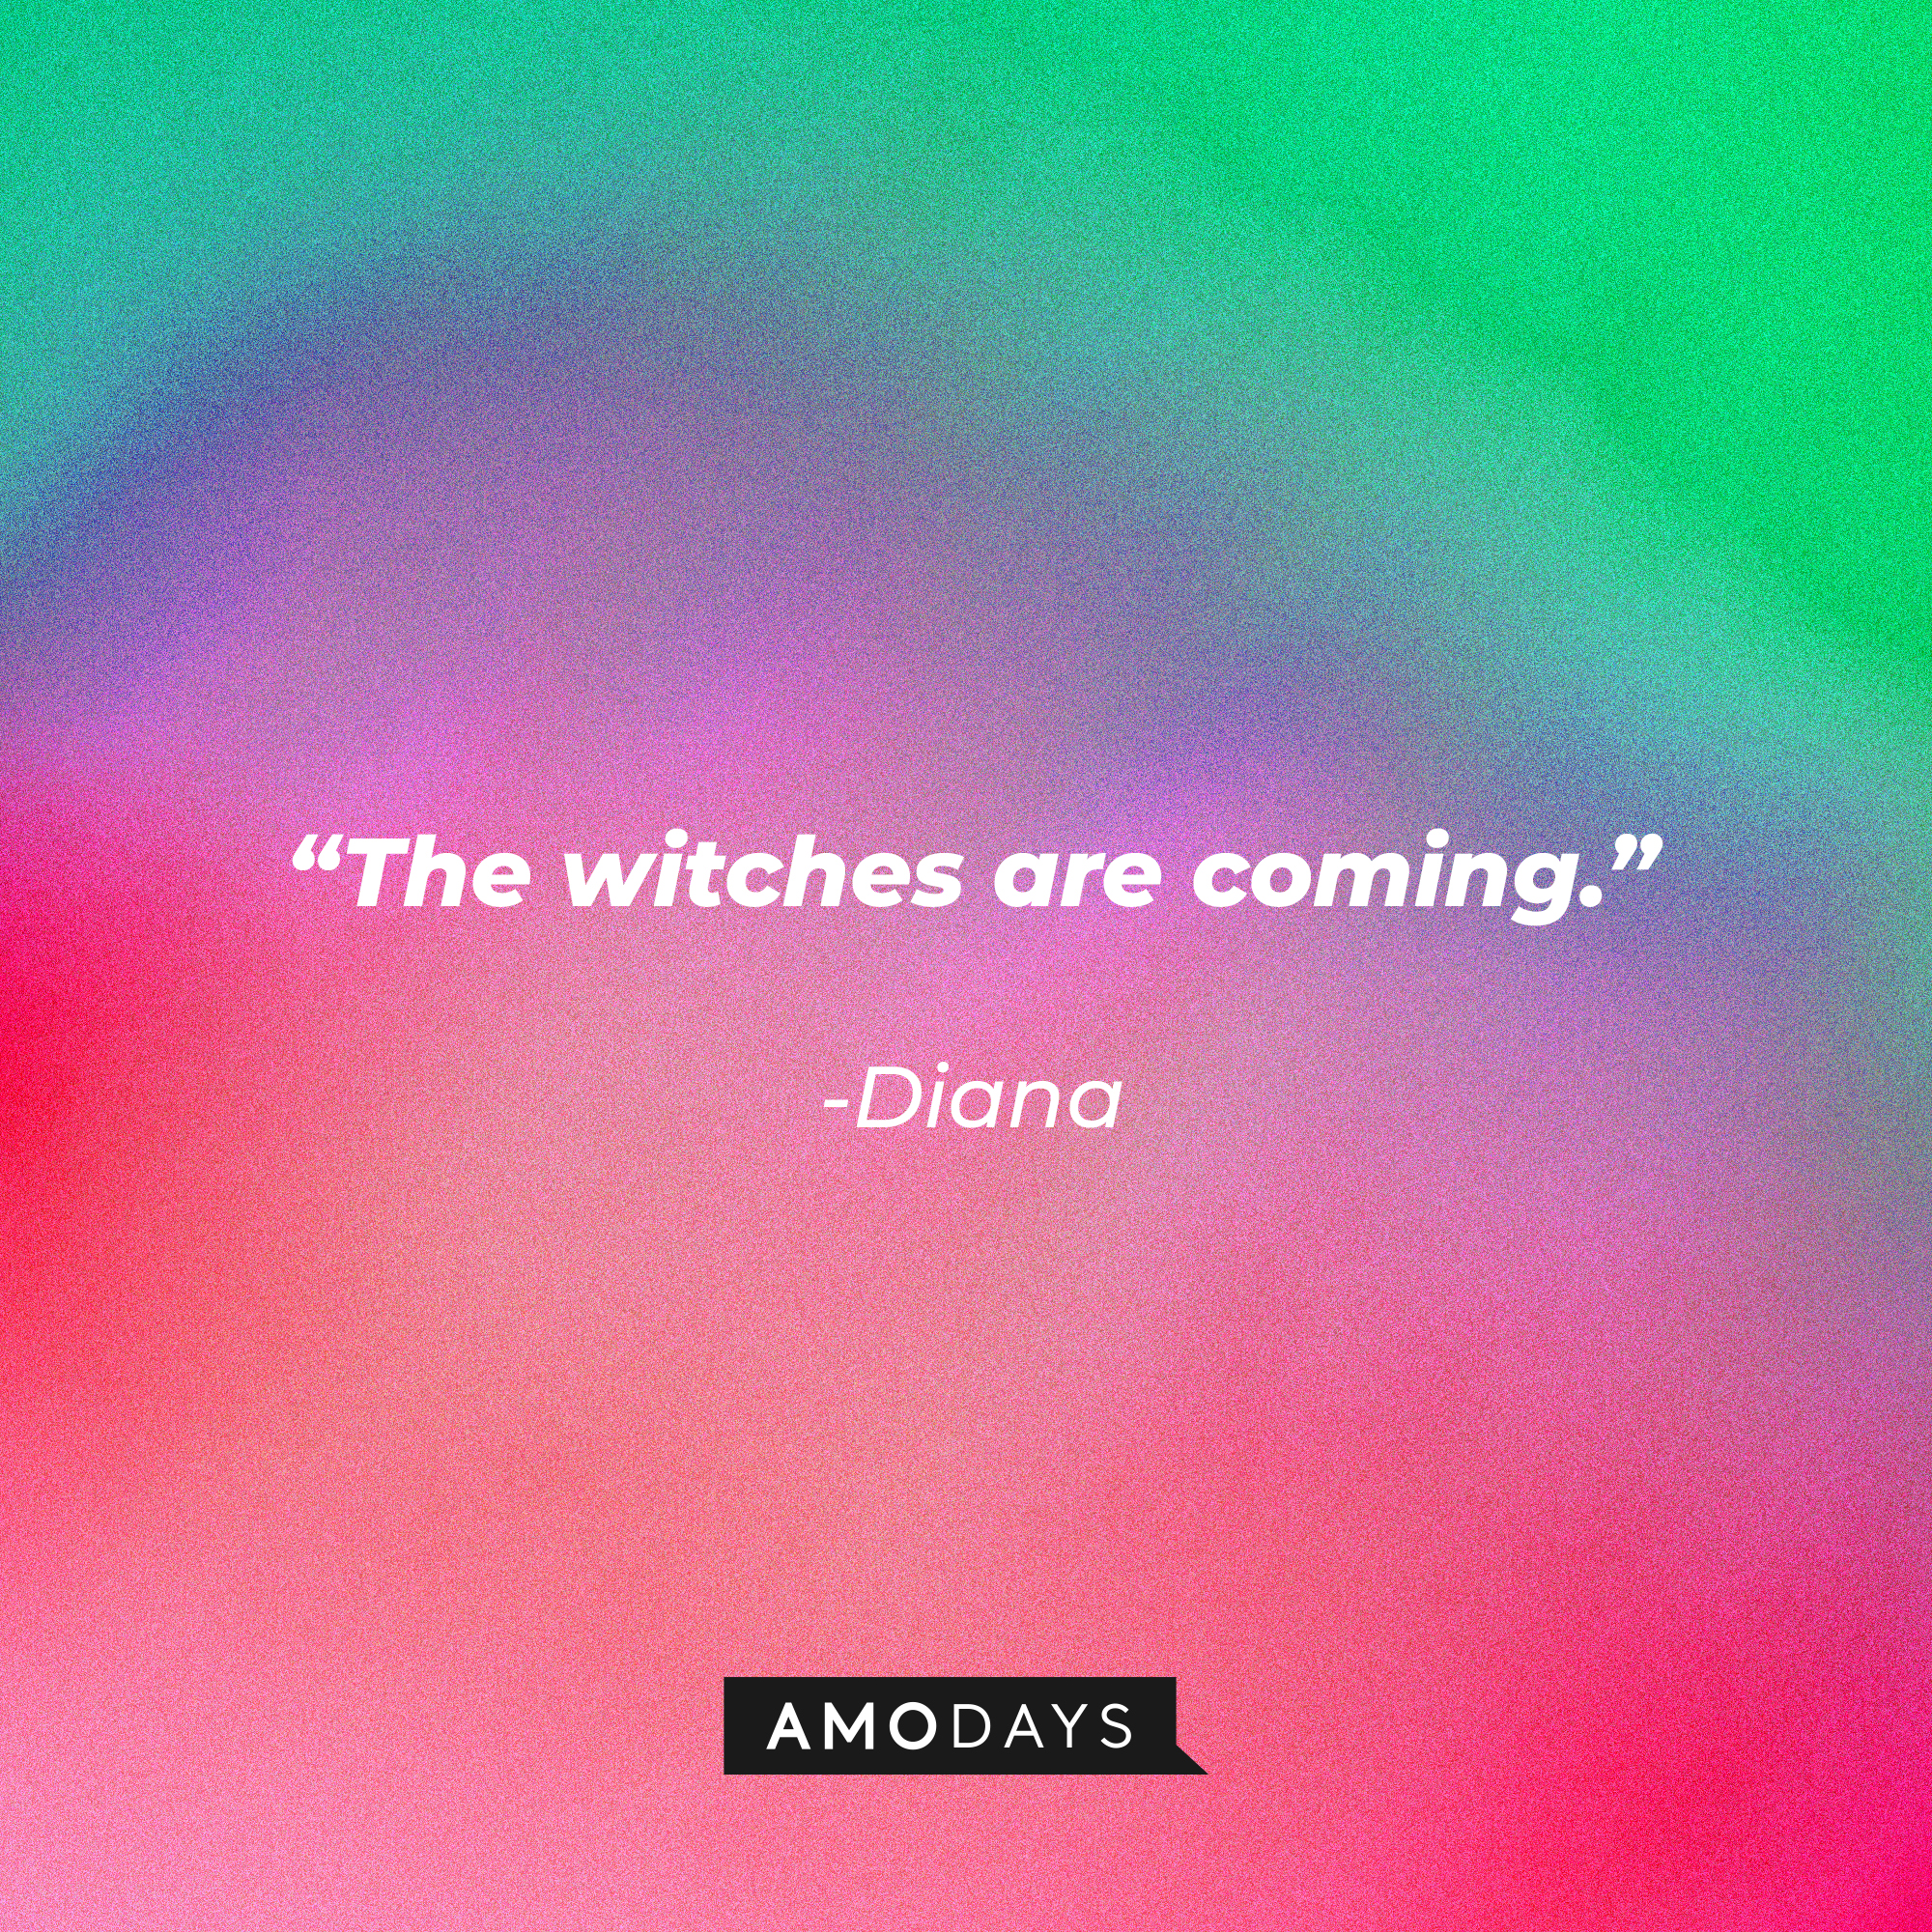 Diana's quote: “The witches are coming.” | Source: Amodays